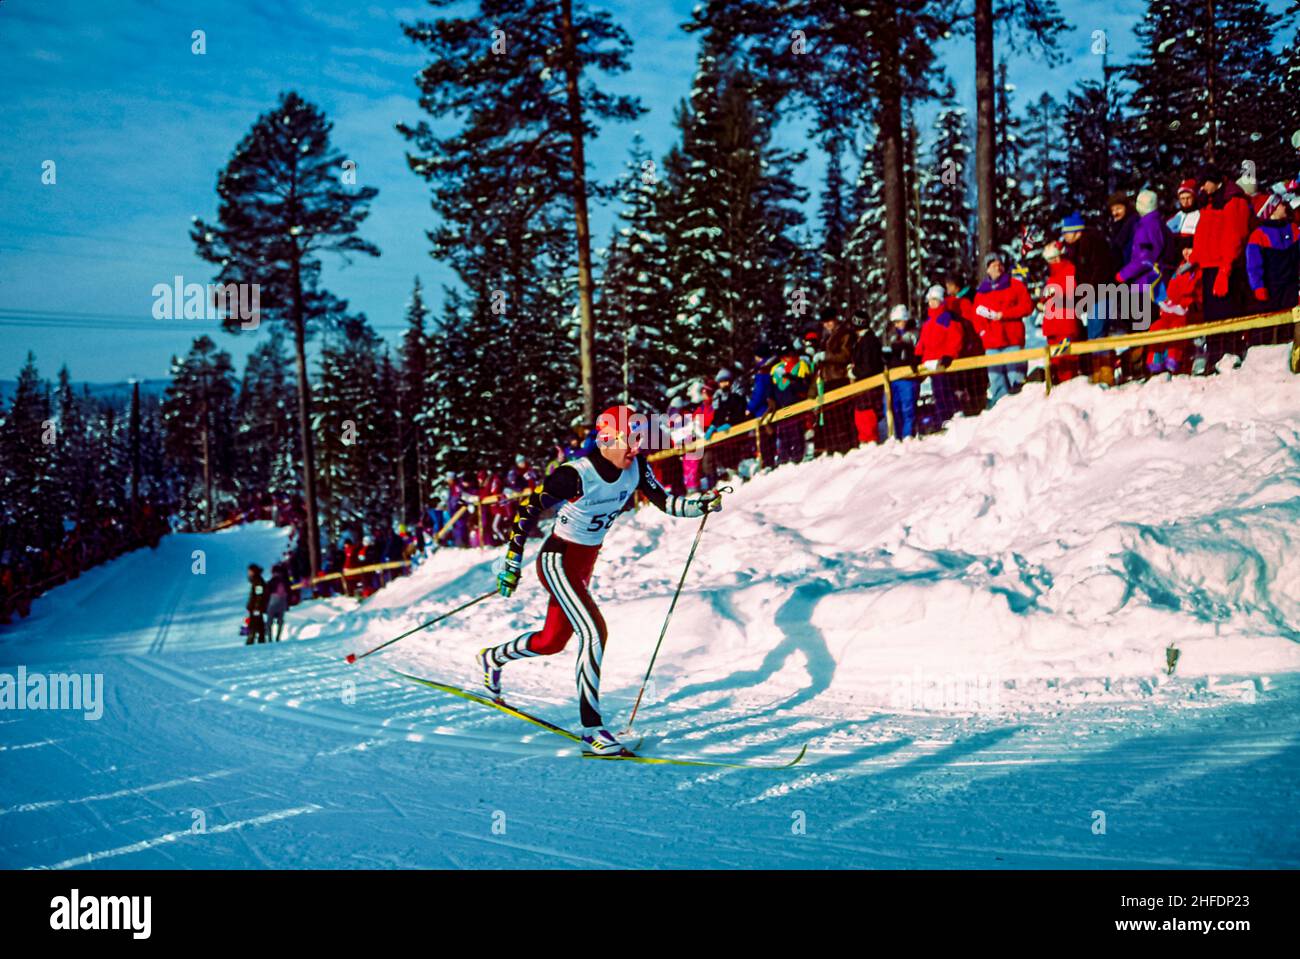 Pavel Ryabinin (KAZ) competing in the men's 10km cross country skiing at the 1994 Olympic Winter Games. Stock Photo